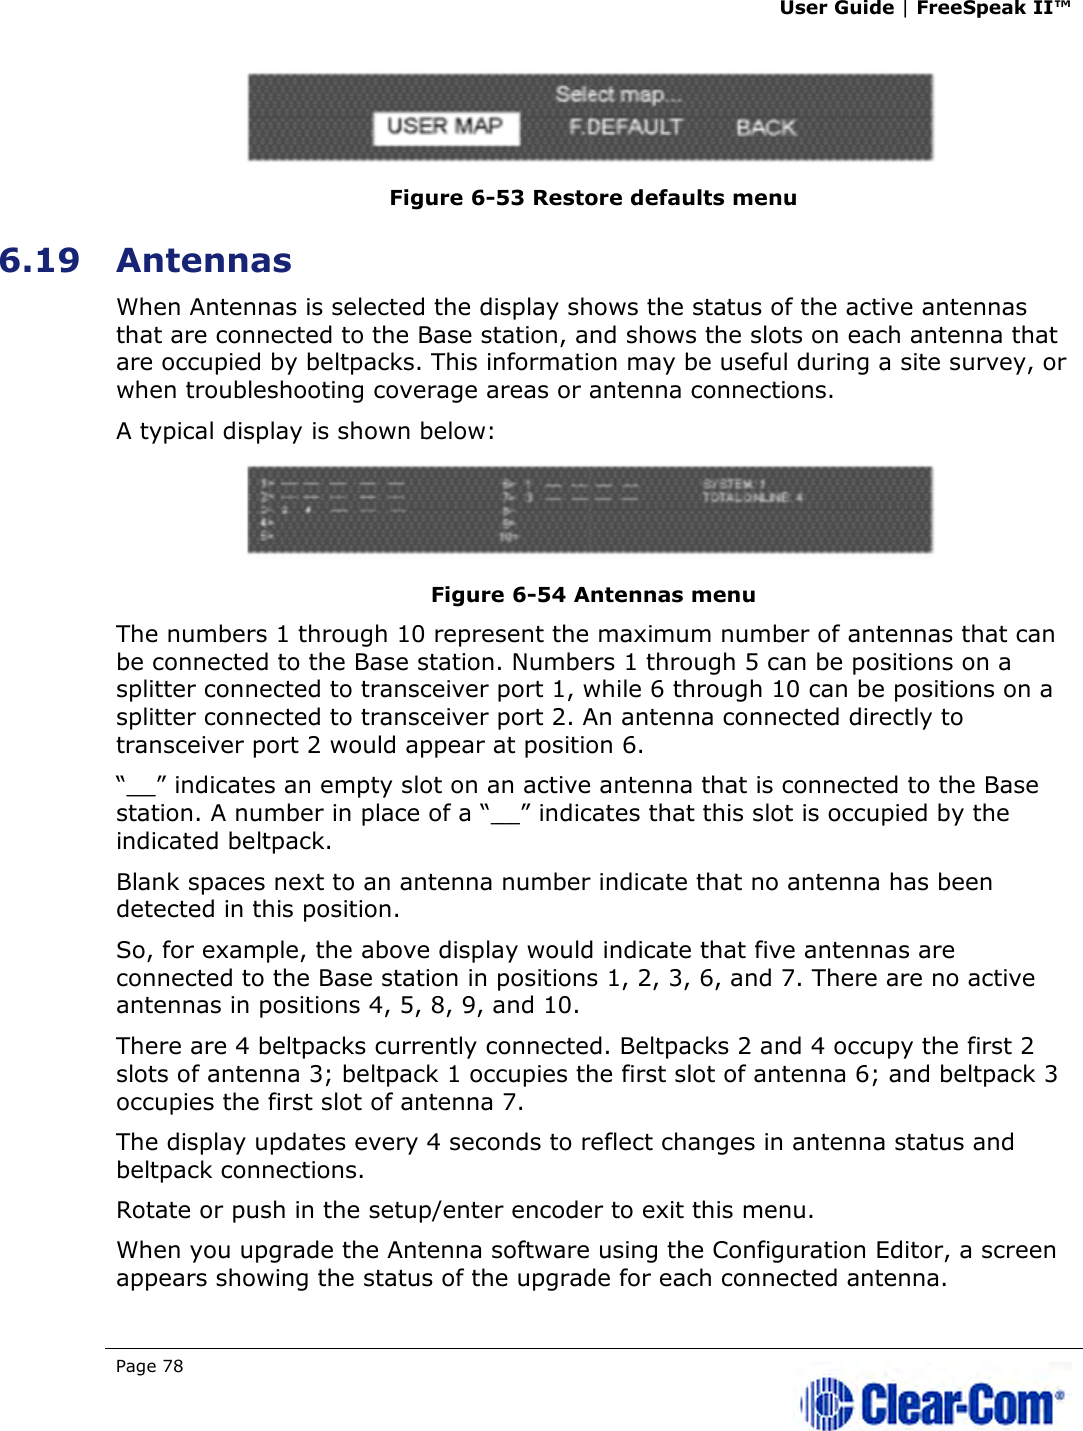 User Guide | FreeSpeak II™  Page 78    Figure 6-53 Restore defaults menu 6.19 Antennas When Antennas is selected the display shows the status of the active antennas that are connected to the Base station, and shows the slots on each antenna that are occupied by beltpacks. This information may be useful during a site survey, or when troubleshooting coverage areas or antenna connections.  A typical display is shown below:  Figure 6-54 Antennas menu  The numbers 1 through 10 represent the maximum number of antennas that can be connected to the Base station. Numbers 1 through 5 can be positions on a splitter connected to transceiver port 1, while 6 through 10 can be positions on a splitter connected to transceiver port 2. An antenna connected directly to transceiver port 2 would appear at position 6.  “__” indicates an empty slot on an active antenna that is connected to the Base station. A number in place of a “__” indicates that this slot is occupied by the indicated beltpack.  Blank spaces next to an antenna number indicate that no antenna has been detected in this position.  So, for example, the above display would indicate that five antennas are connected to the Base station in positions 1, 2, 3, 6, and 7. There are no active antennas in positions 4, 5, 8, 9, and 10.  There are 4 beltpacks currently connected. Beltpacks 2 and 4 occupy the first 2 slots of antenna 3; beltpack 1 occupies the first slot of antenna 6; and beltpack 3 occupies the first slot of antenna 7.  The display updates every 4 seconds to reflect changes in antenna status and beltpack connections.  Rotate or push in the setup/enter encoder to exit this menu. When you upgrade the Antenna software using the Configuration Editor, a screen appears showing the status of the upgrade for each connected antenna.  